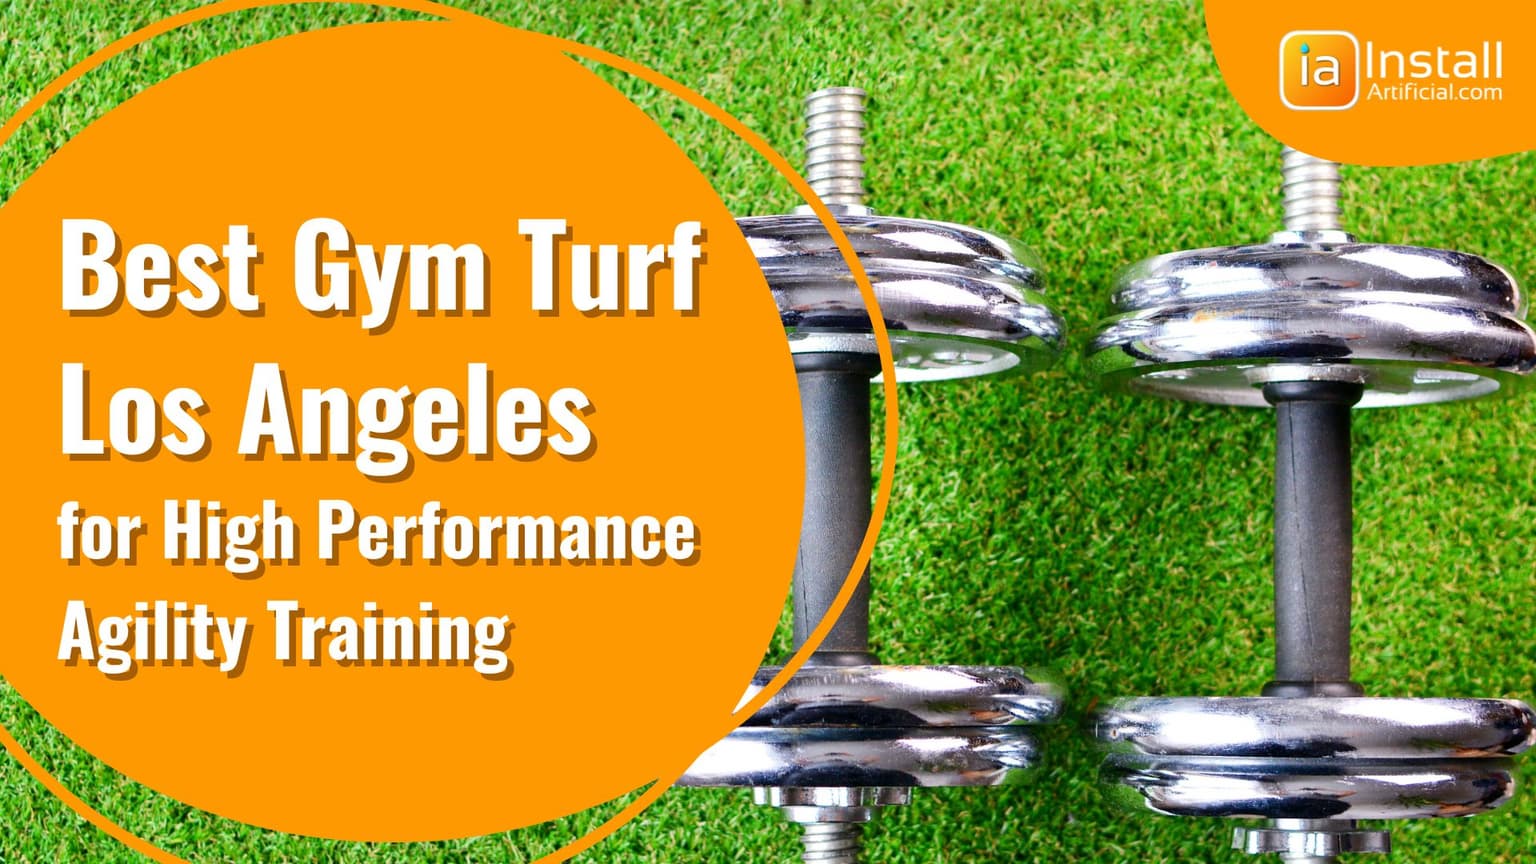 Best Gym Turf Los Angeles for High-Performance Training